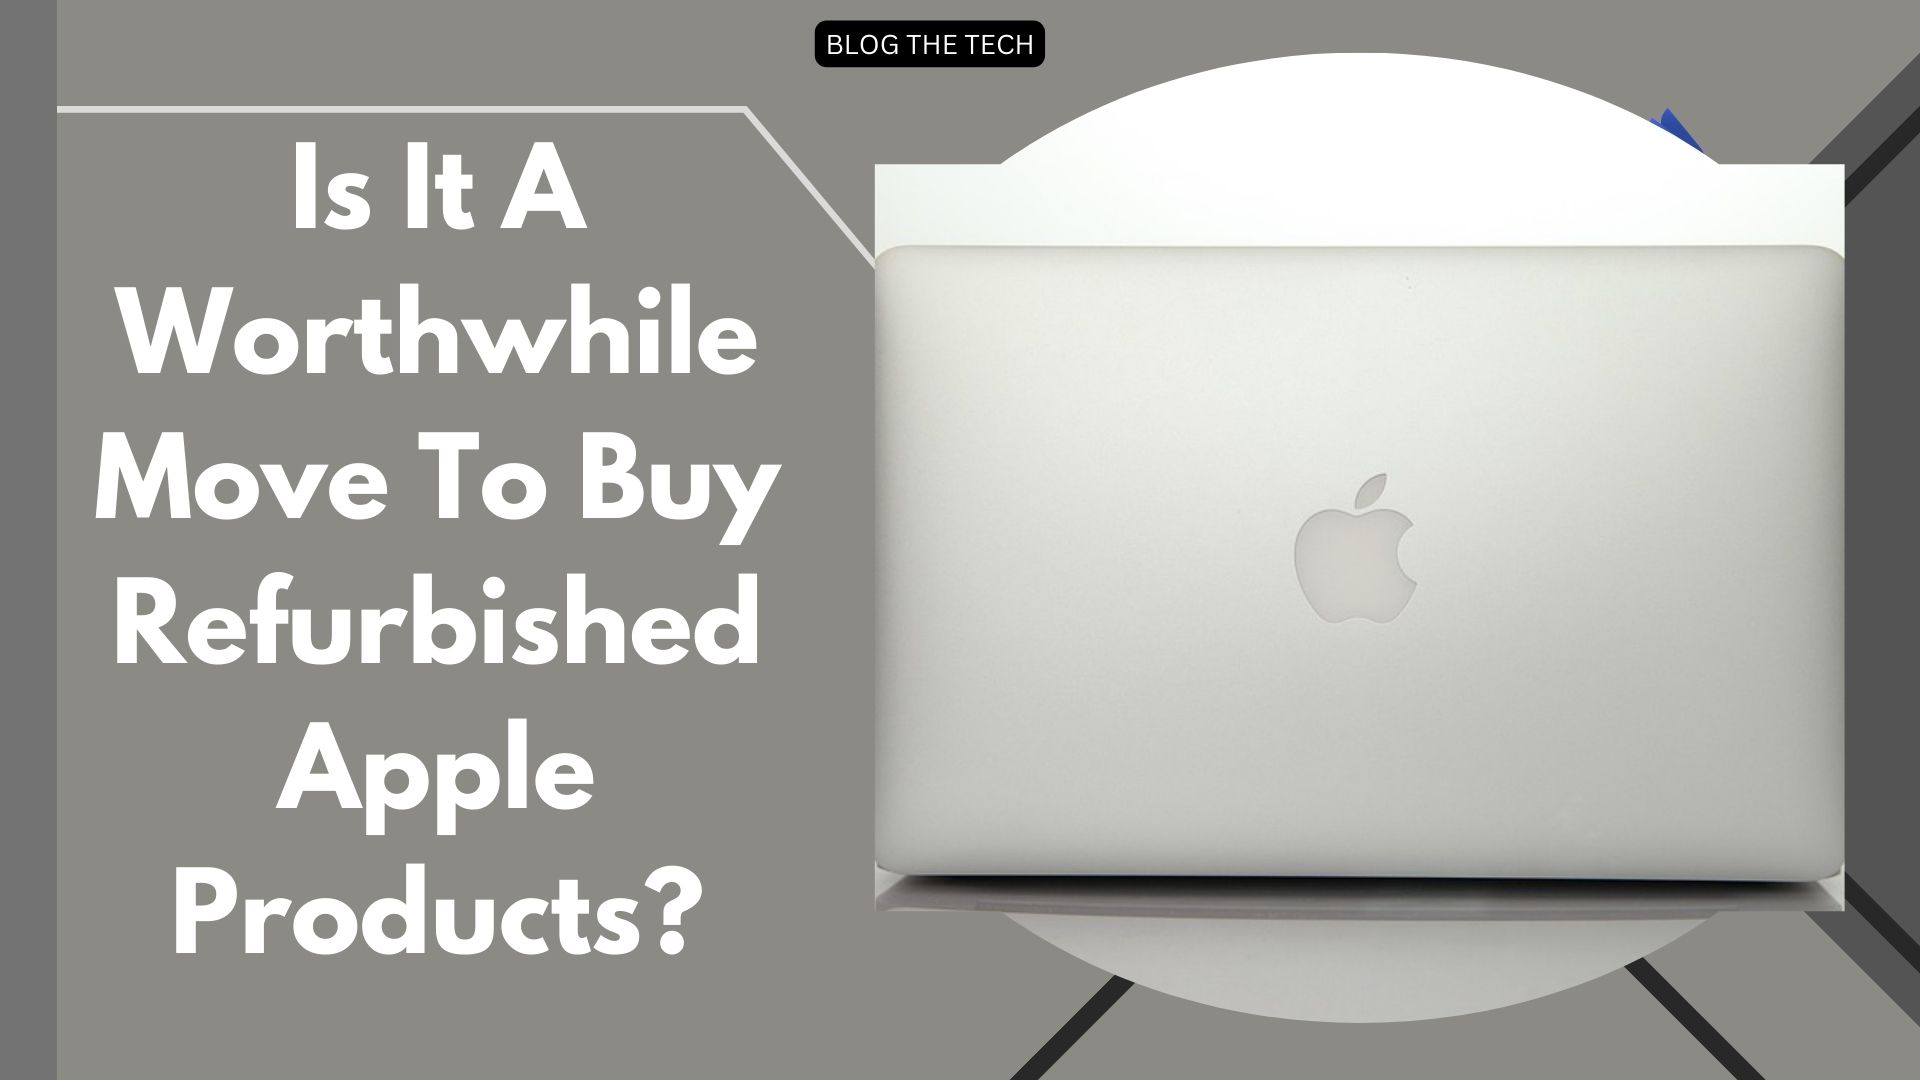 Buy Refurbished Apple Products?